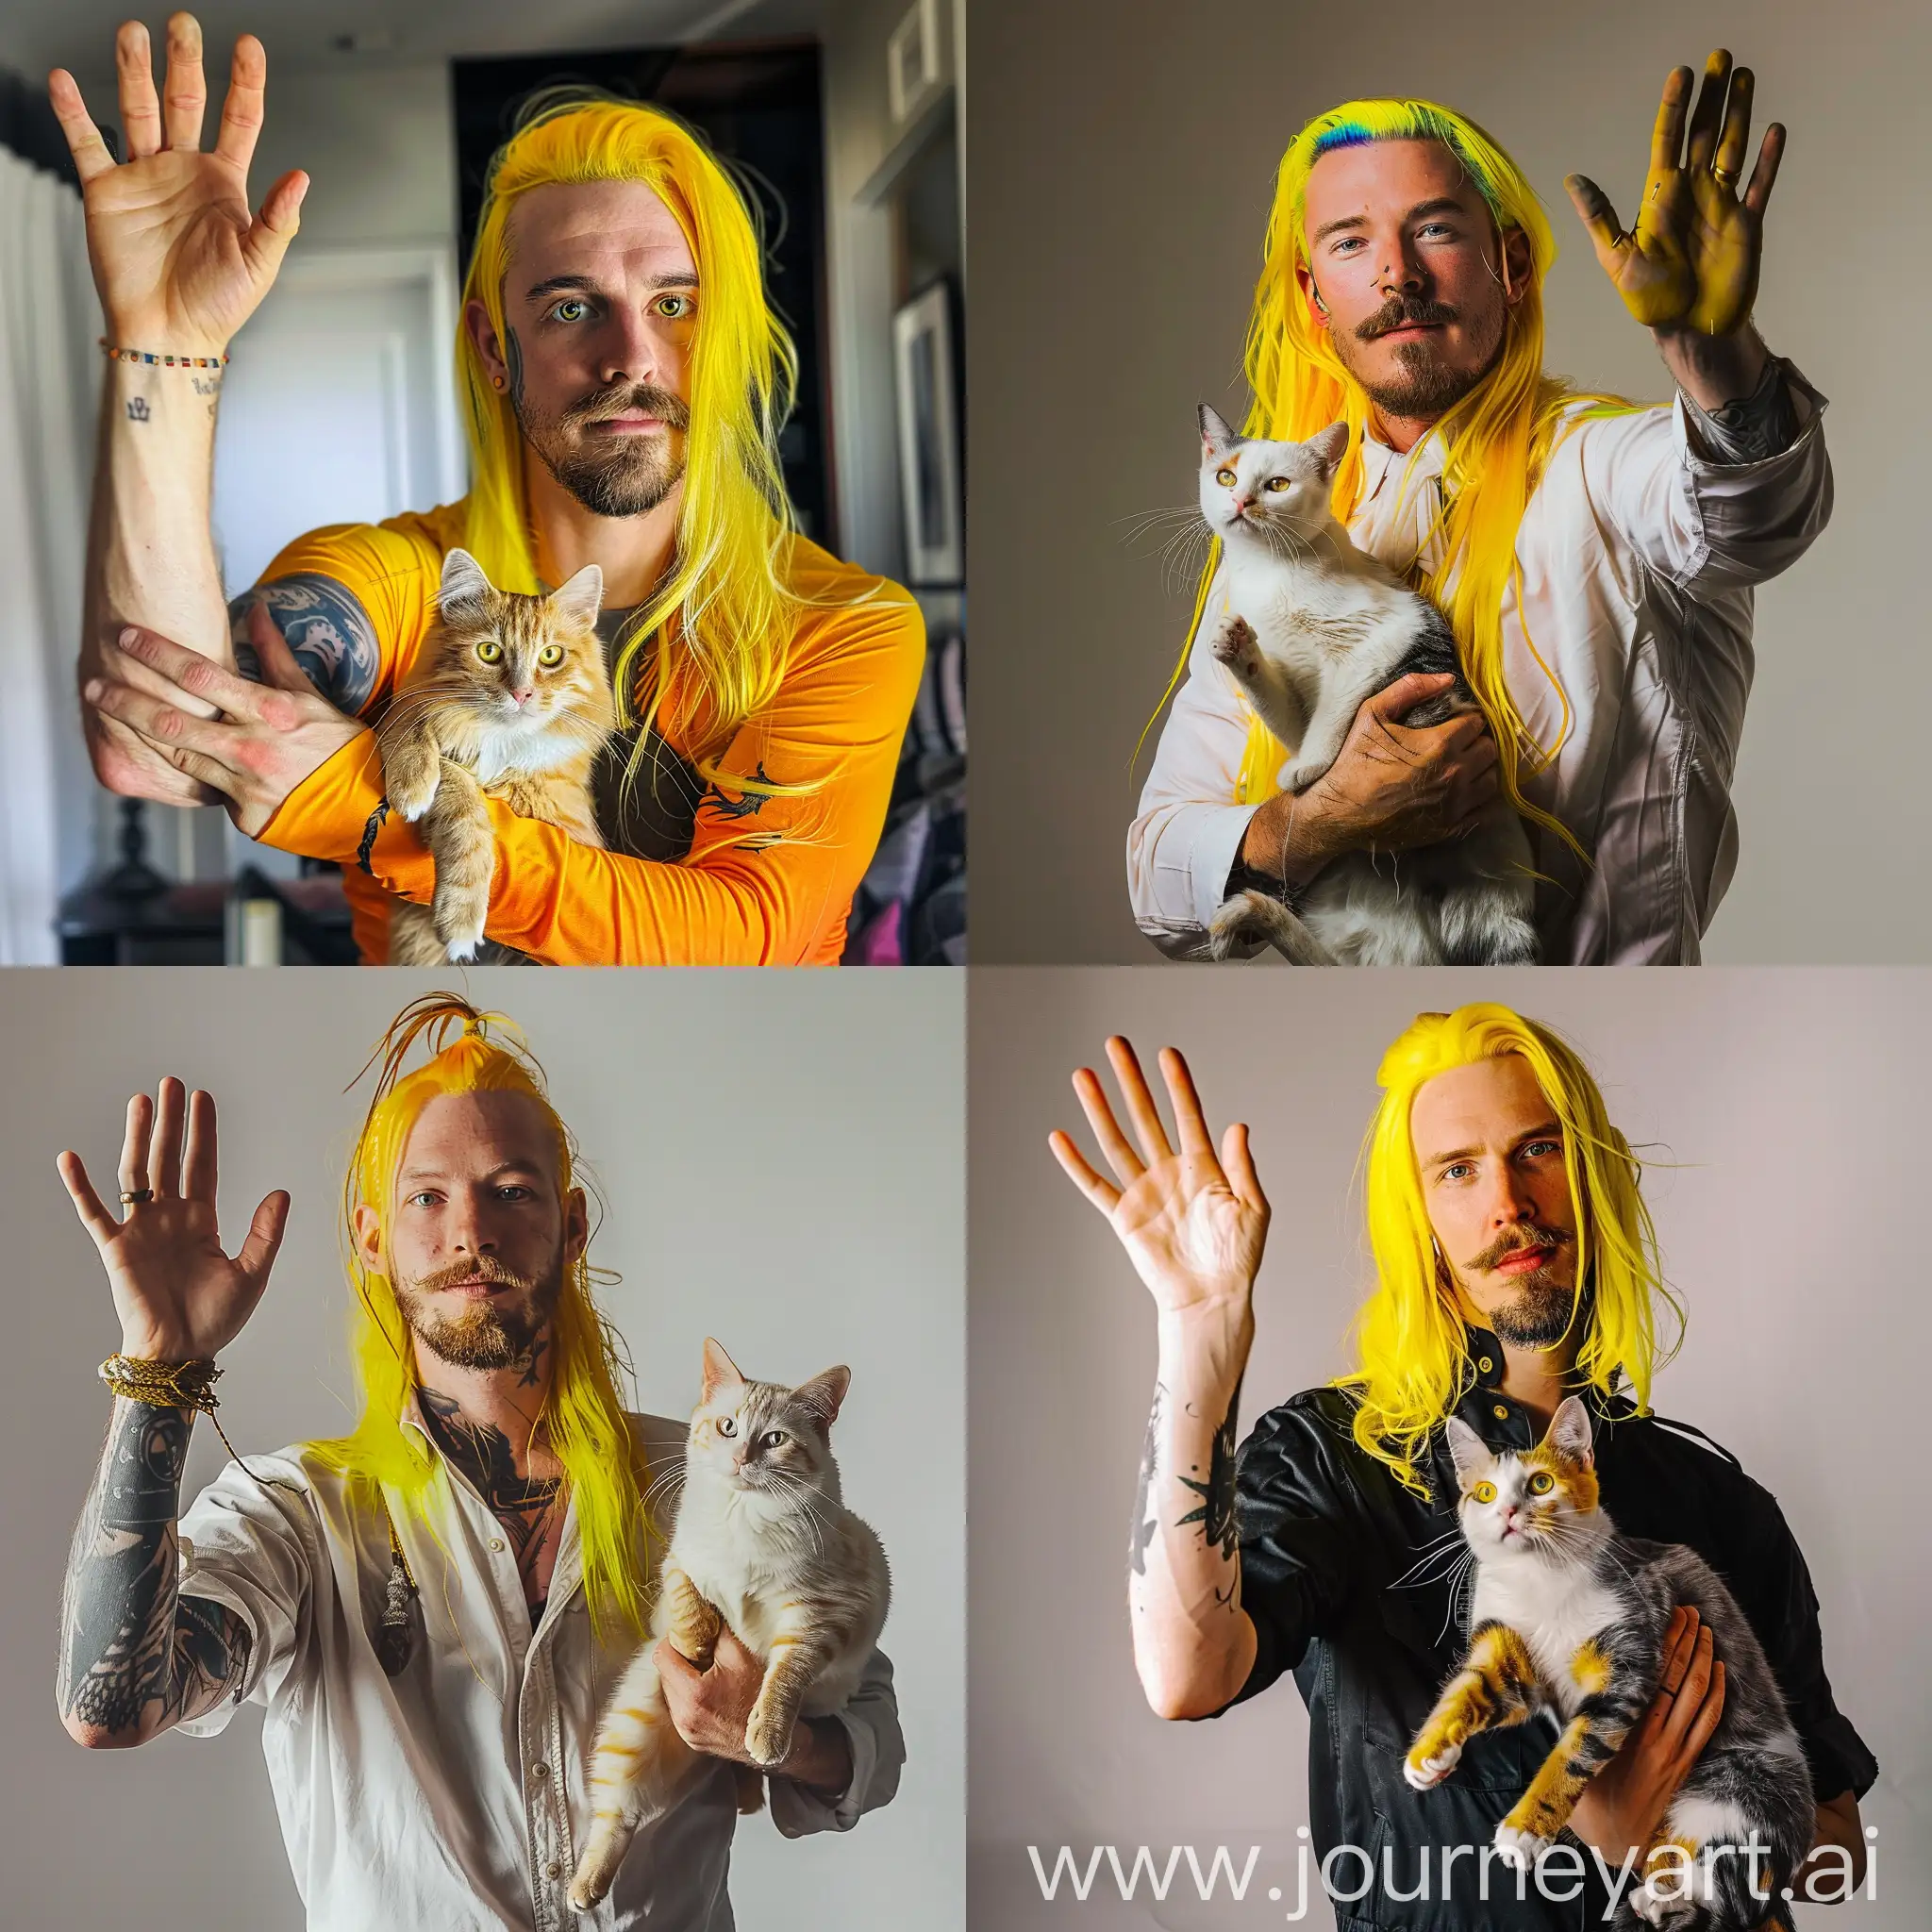 Bearded-Man-with-Long-Yellow-Hair-Holding-Cat-and-Waving